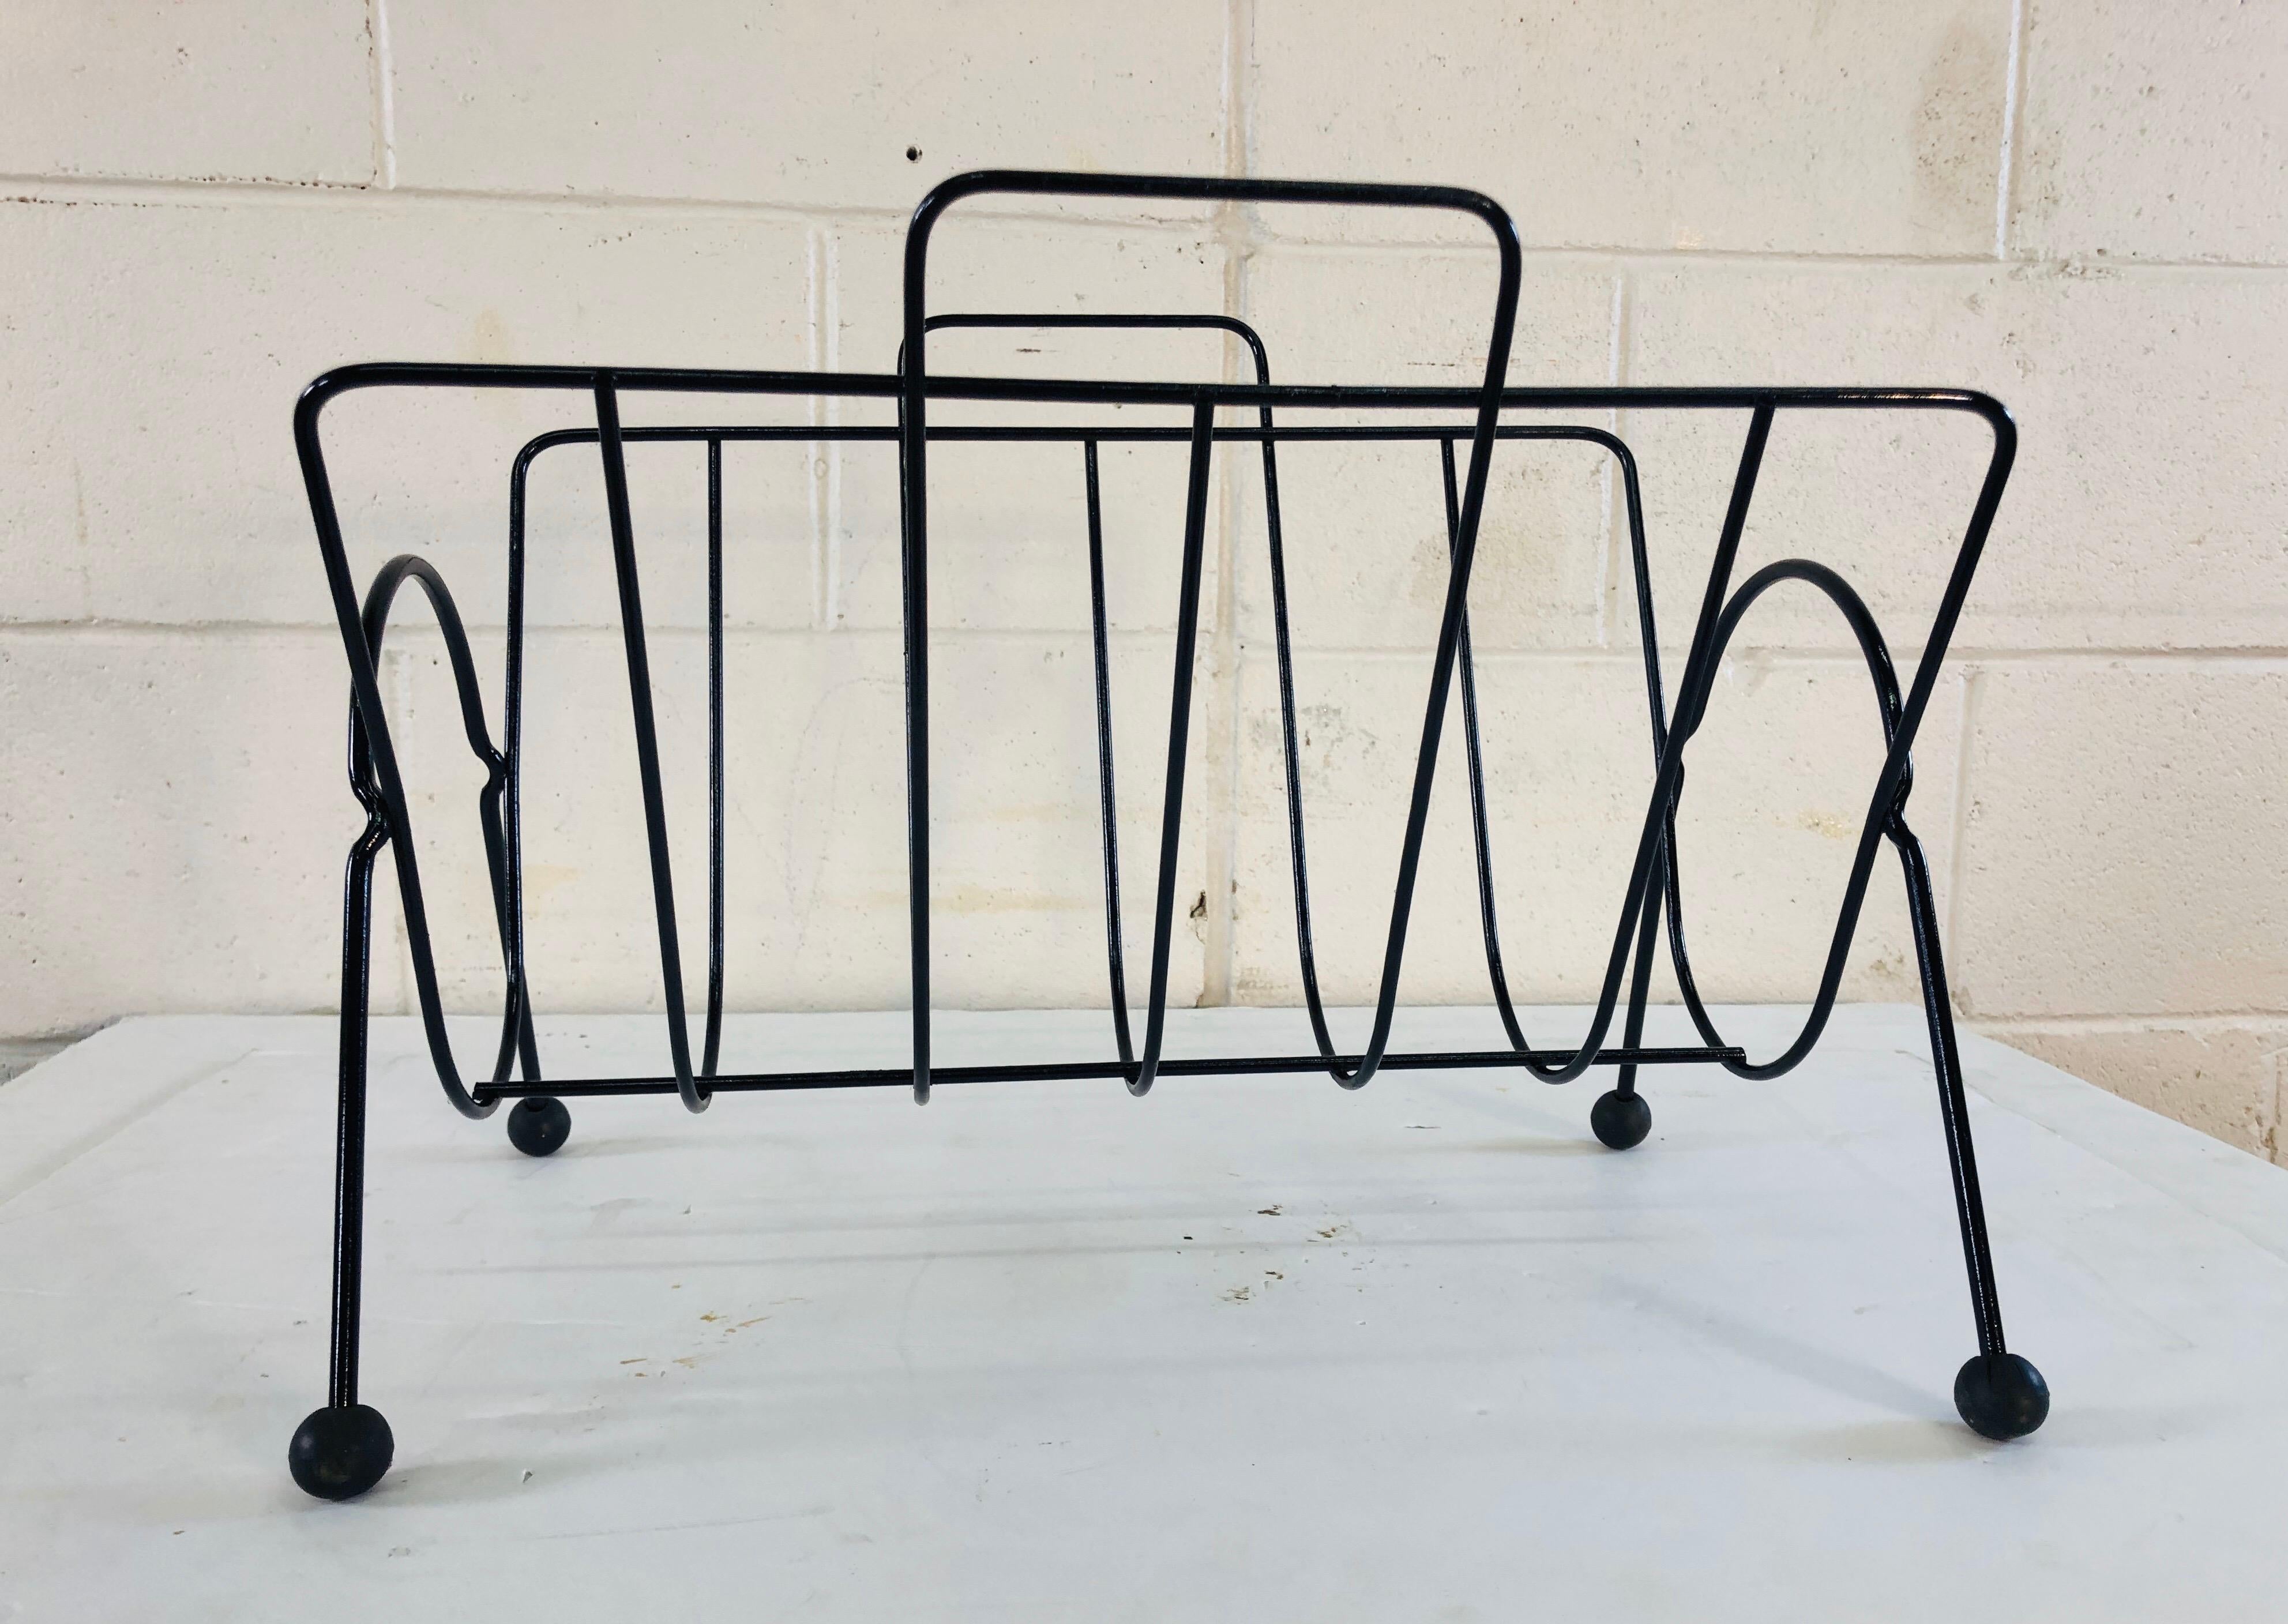 1960s black metal magazine rack with black runner ball feet. Newly restored and refinished.